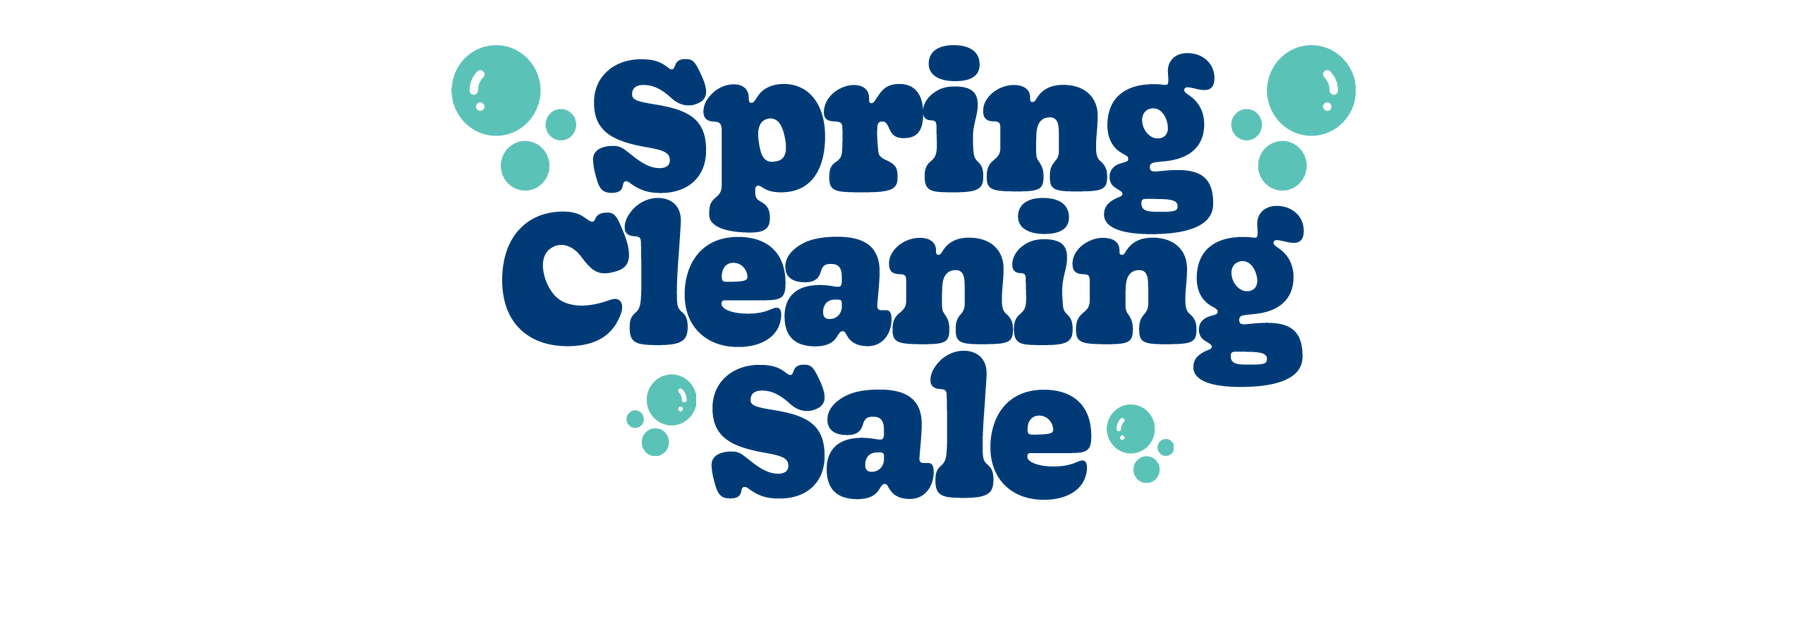 Charlie Hustle Spring Cleaning Sale Save up to 60% Off!